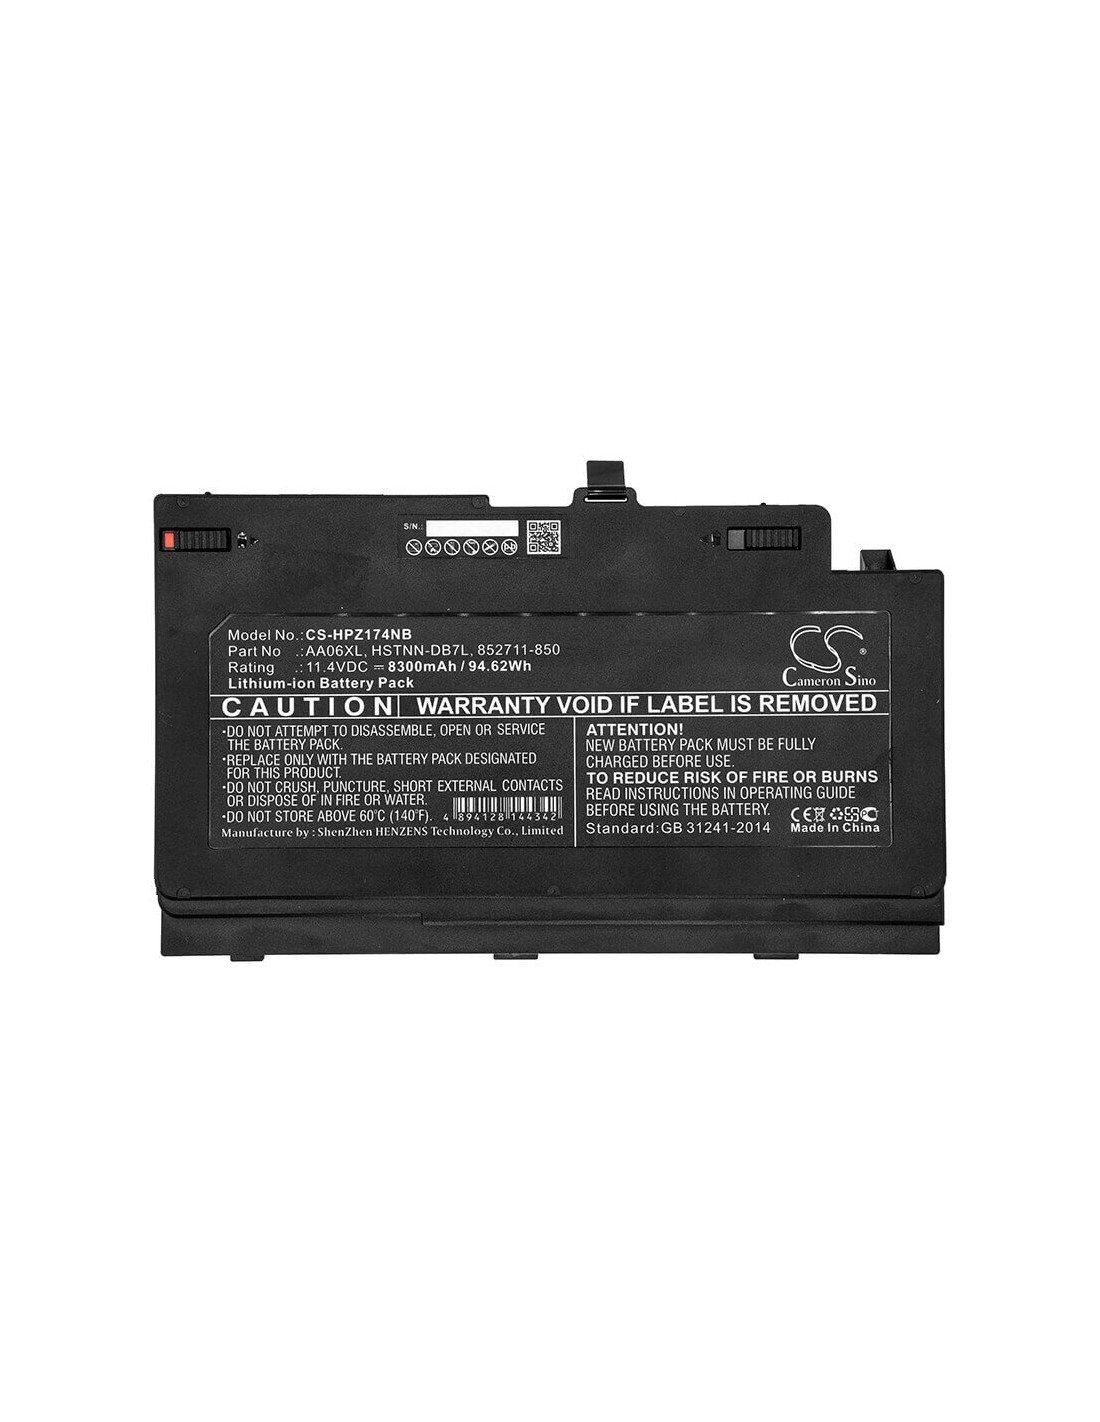 Battery for Hp, Zbook 17 G3 Mobile Workstation, Zbook 17 G4 11.4V, 8300mAh - 94.62Wh